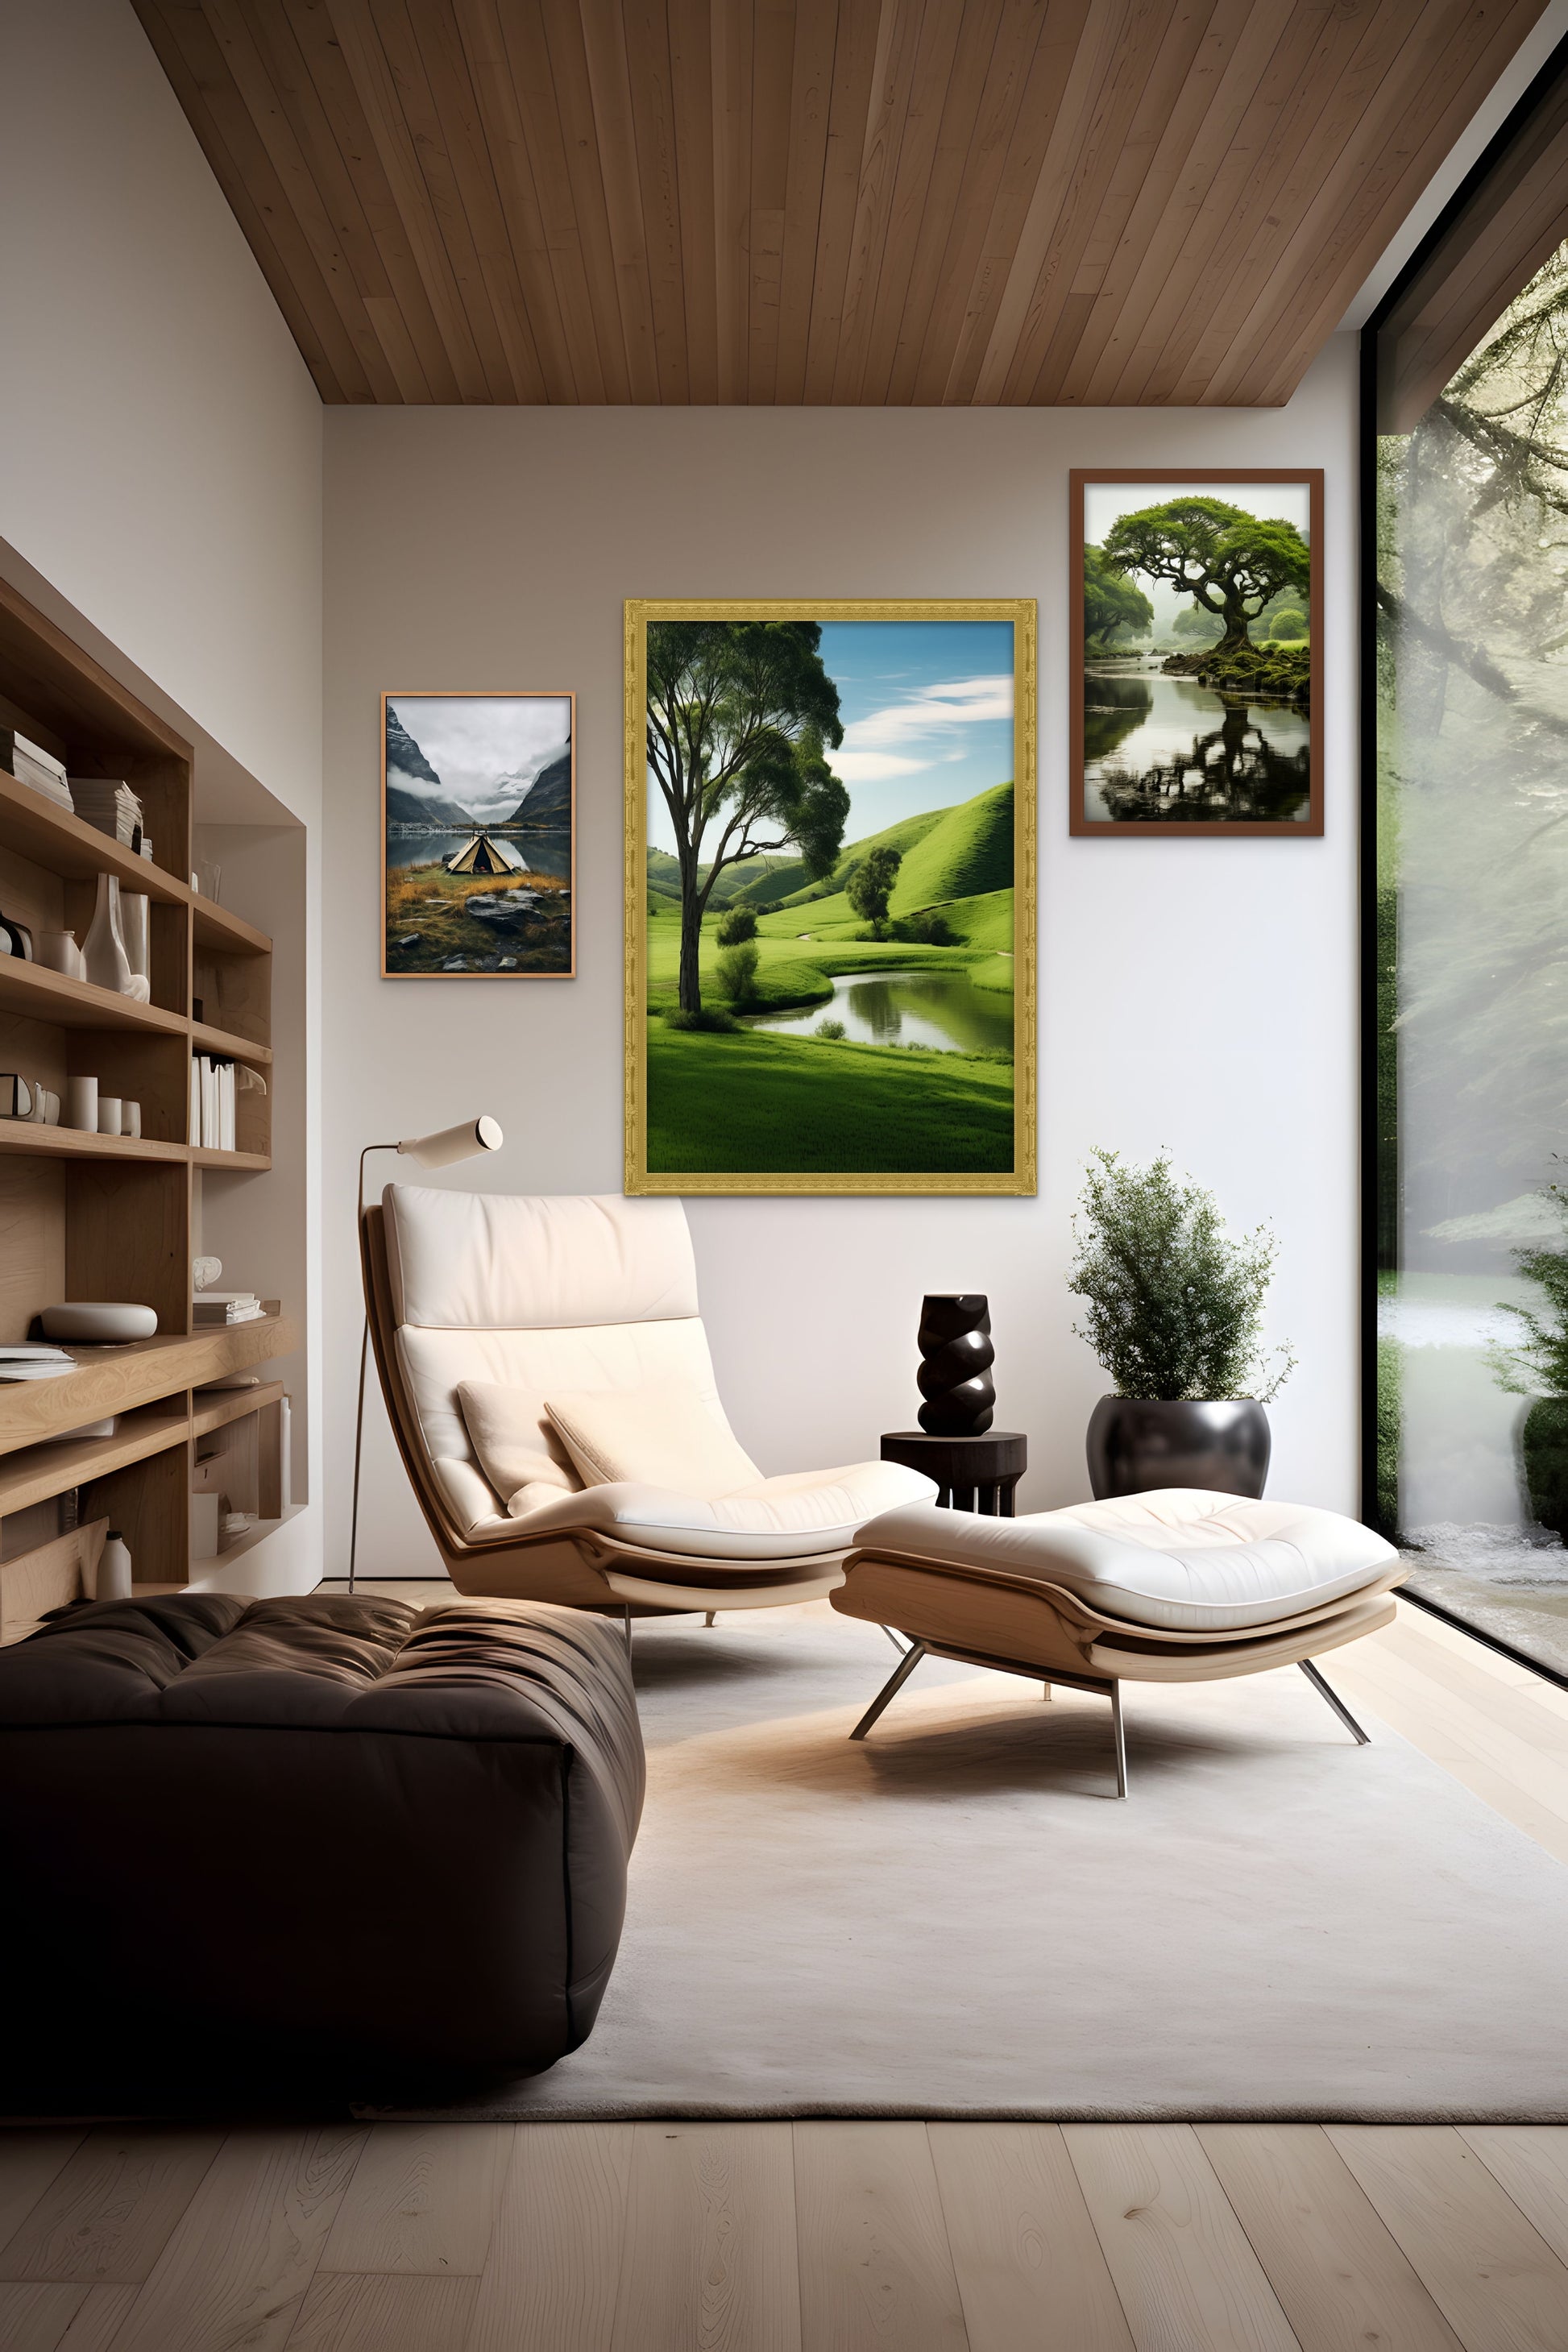 A cozy modern living room with a comfortable chair, ottoman, artwork, and a view of trees through a large window.